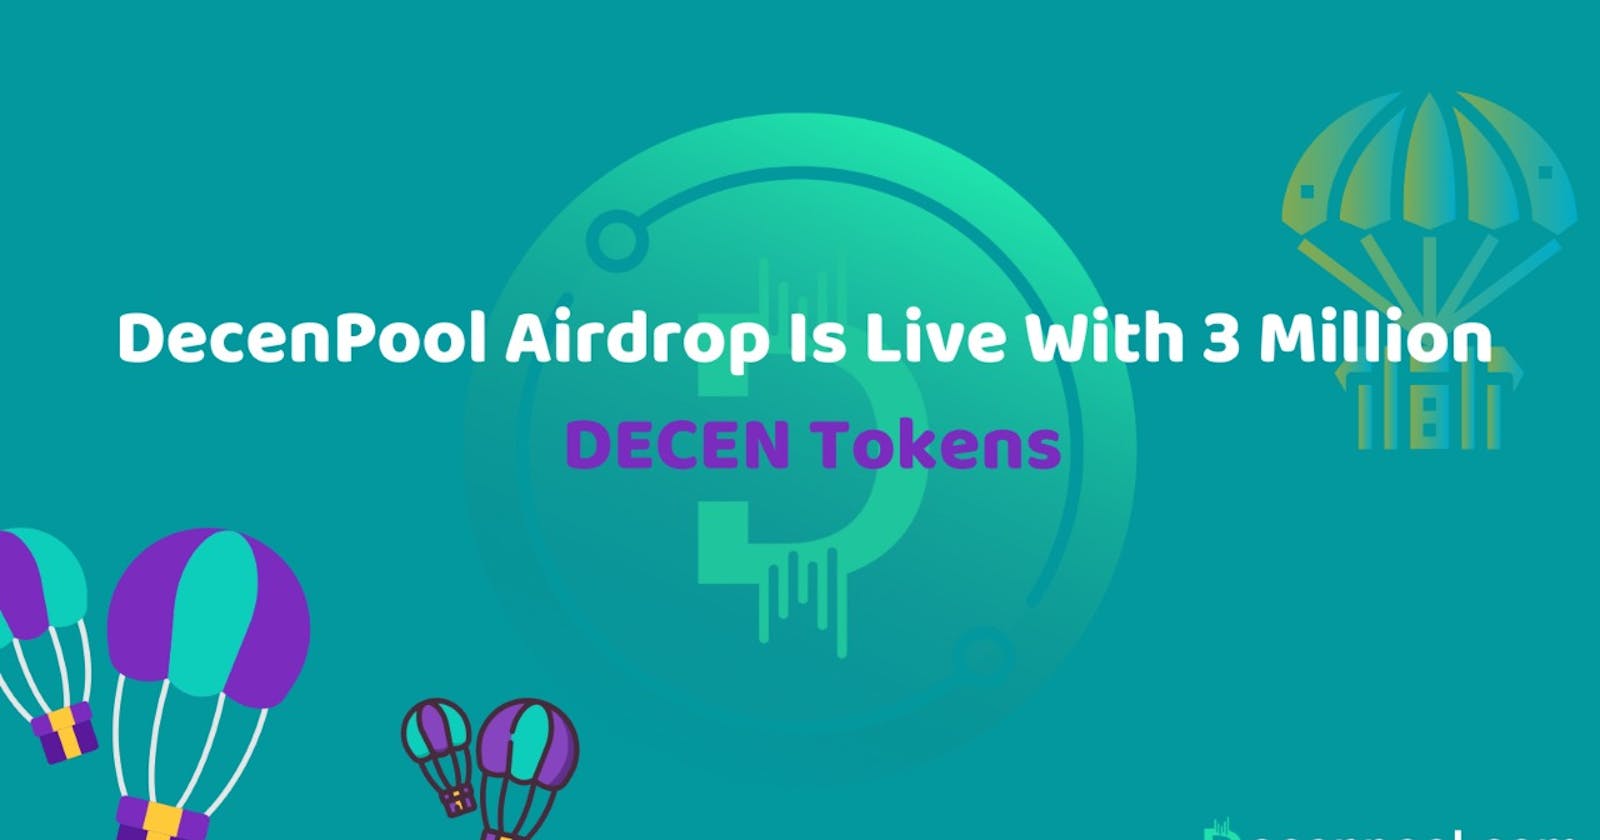 Airdrop of 3 Million DECEN Tokens by DecenPool: The Hottest Airdrop in History